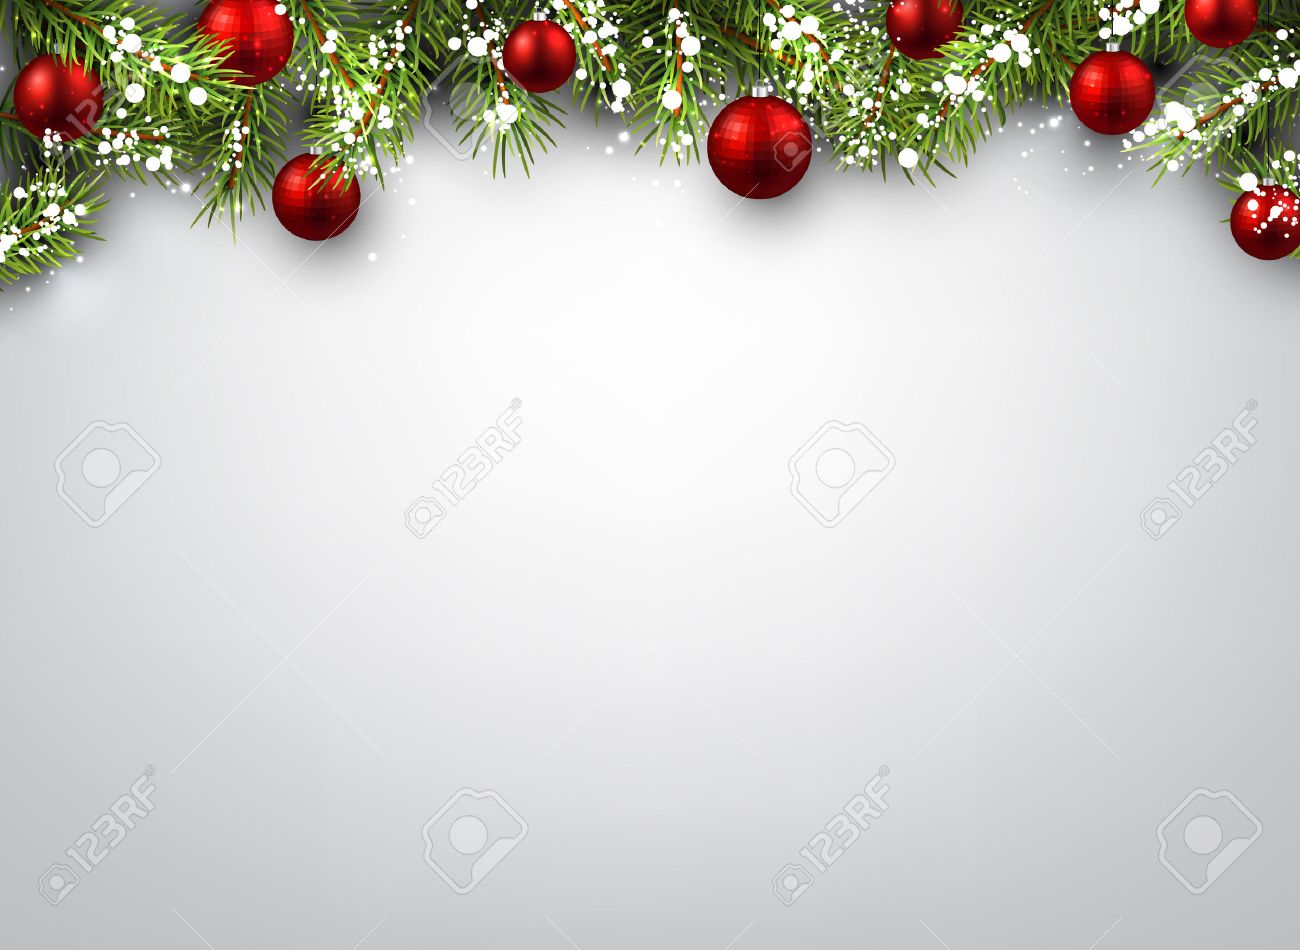 Christmas Background With Fir Branches And Red Balls Royalty Free